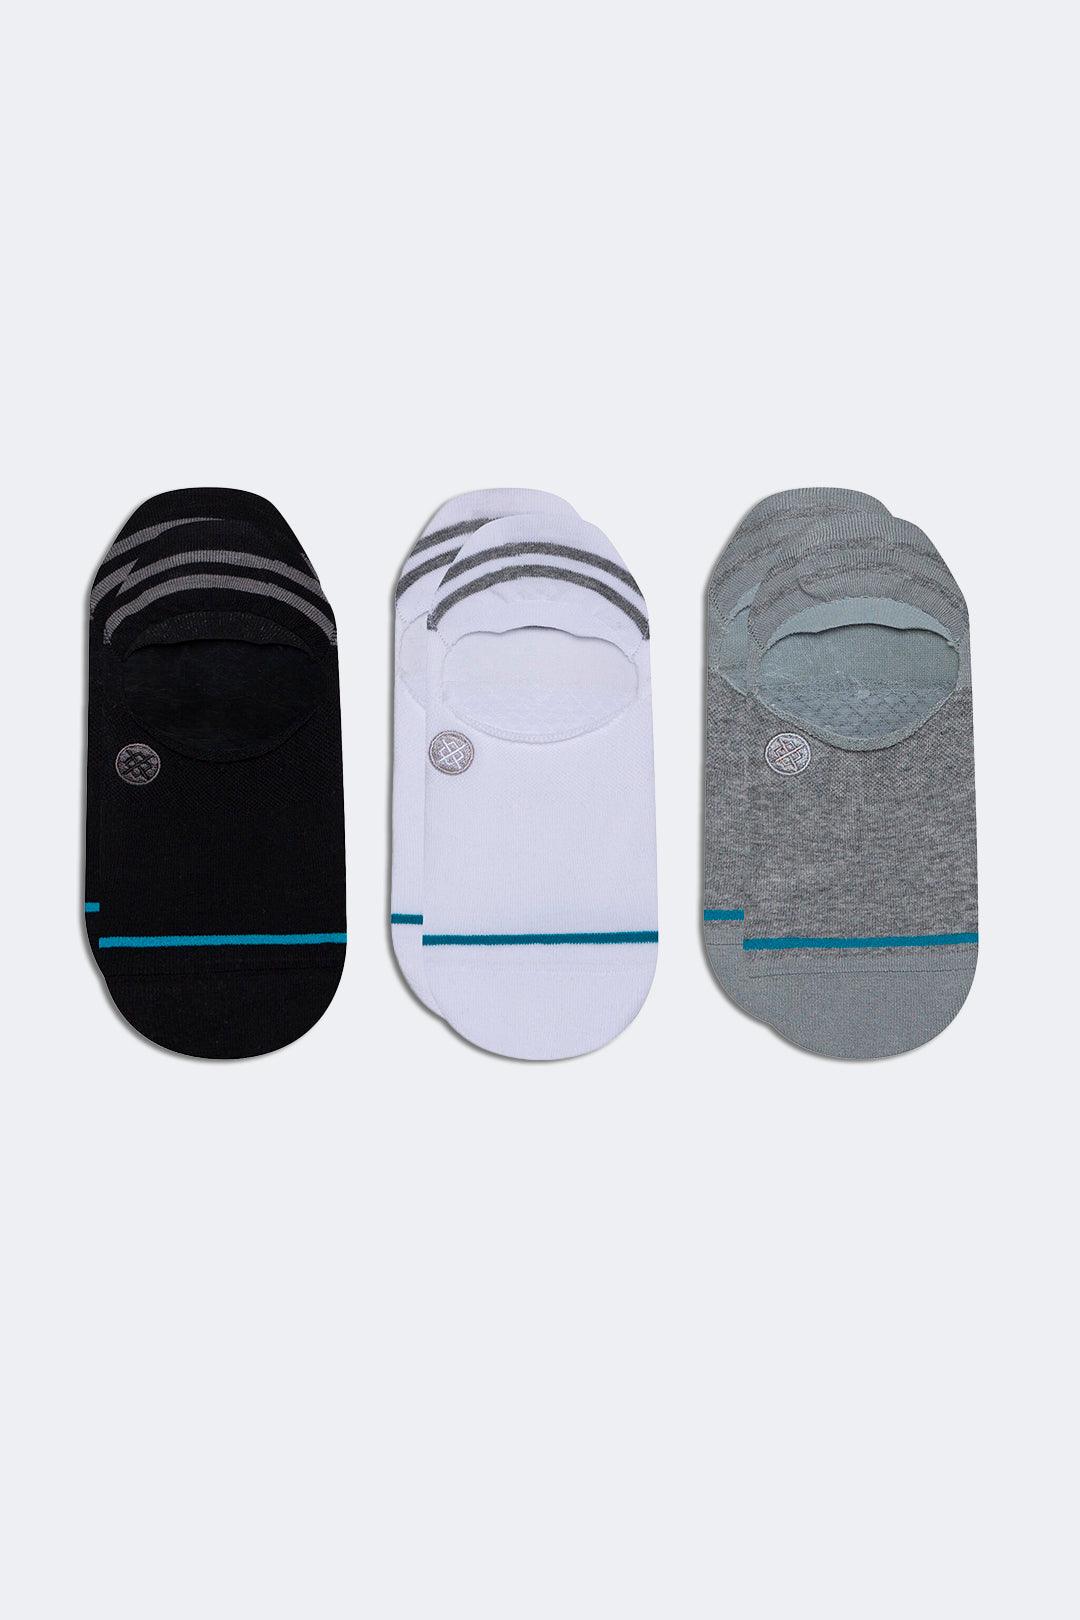 STANCE MEDIAS SENSIBLE TWO 3 PACK - HYPE (7320944640167)